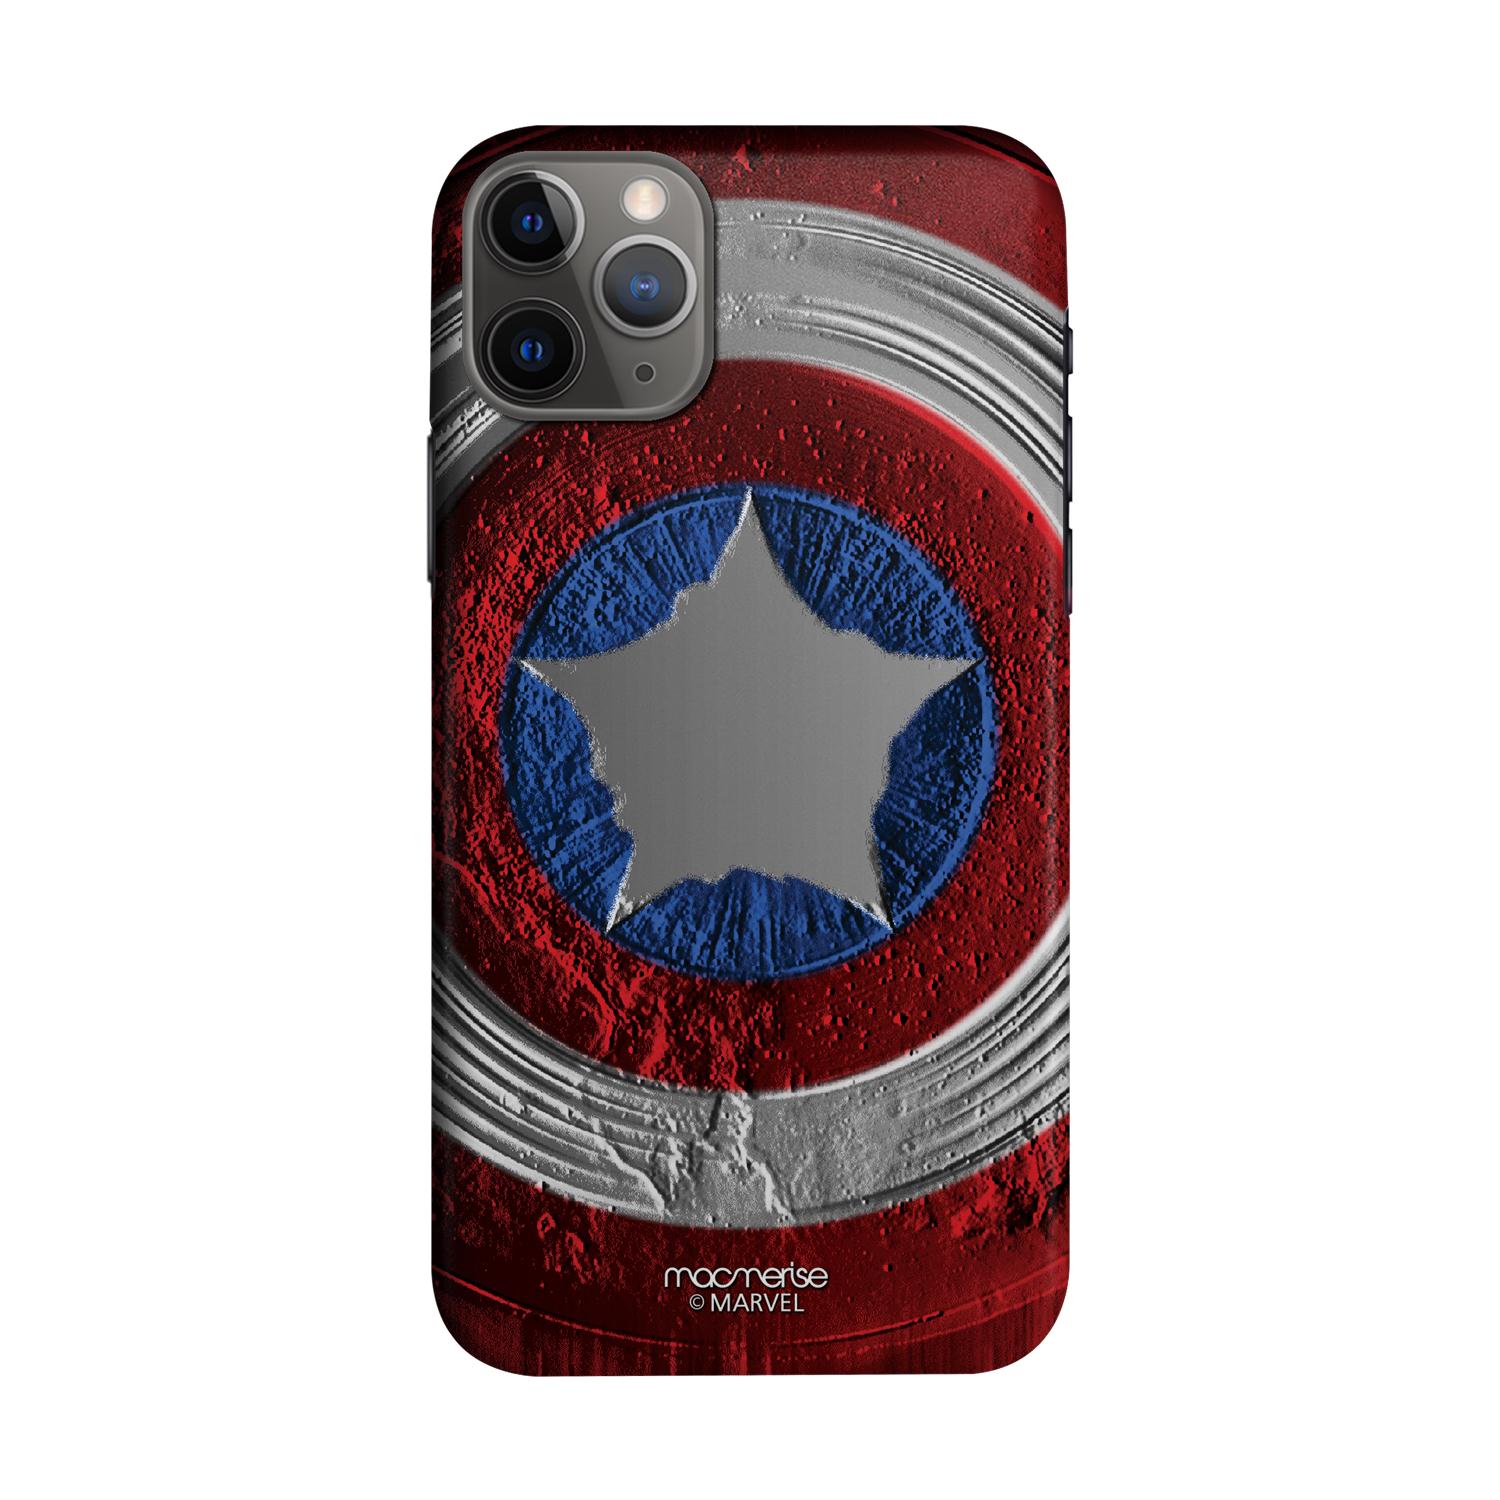 Buy Stoned Shield - Sleek Phone Case for iPhone 11 Pro Online